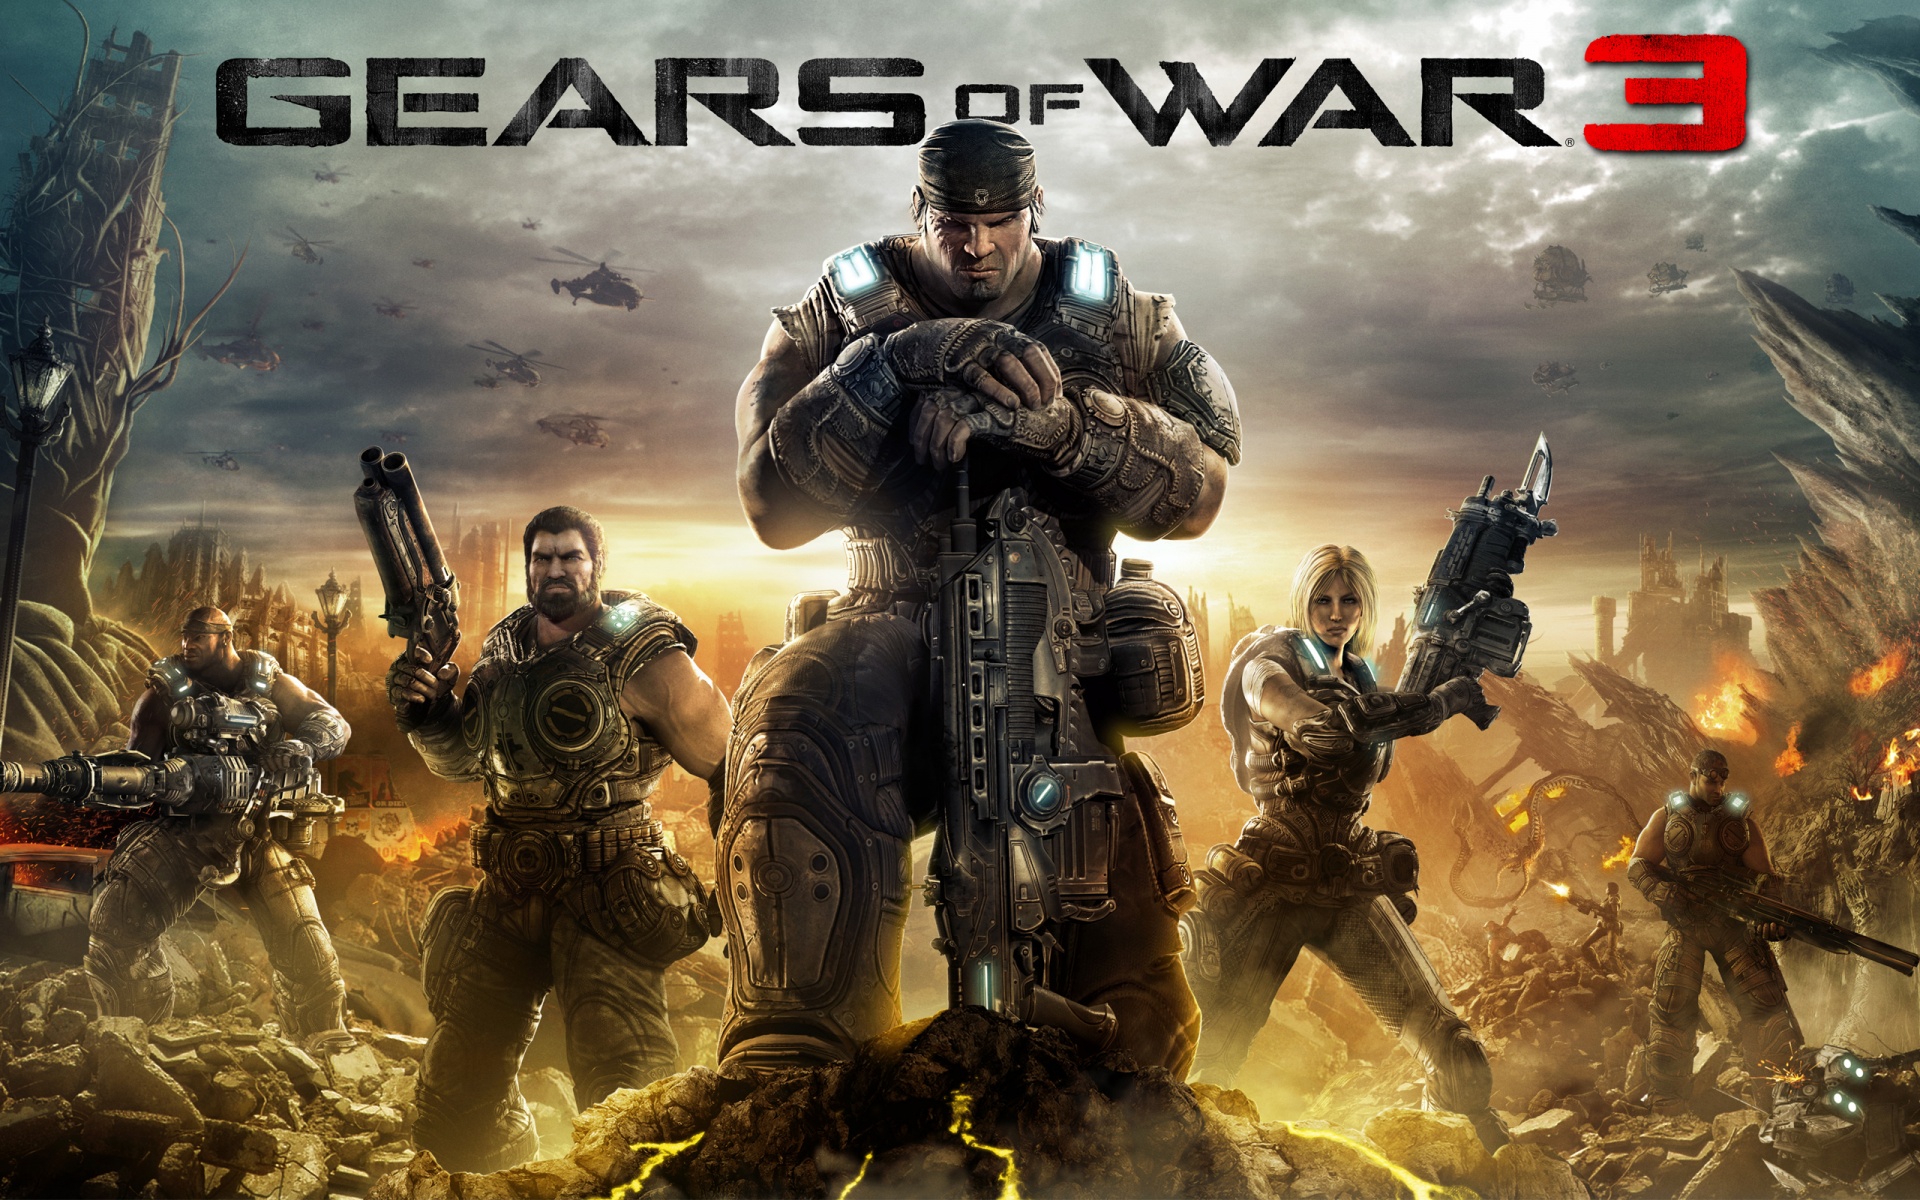 gears of war, video game, gears of war 3 High Definition image